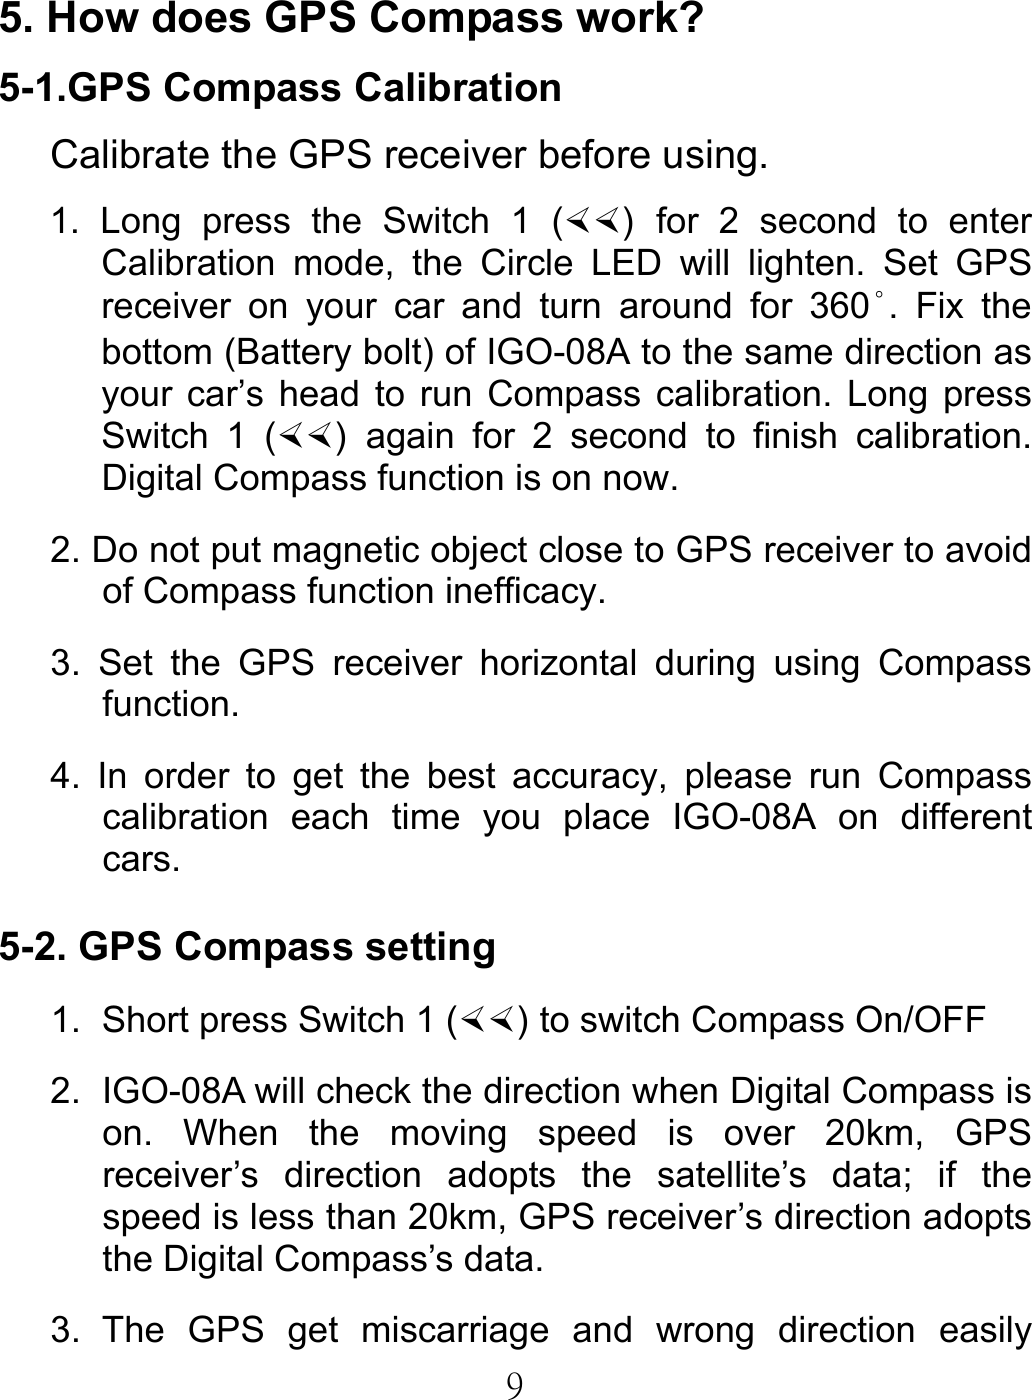  95. How does GPS Compass work? 5-1.GPS Compass Calibration Calibrate the GPS receiver before using. 1. Long press the Switch 1 () for 2 second to enter Calibration mode, the Circle LED will lighten. Set GPS receiver on your car and turn around for 360°. Fix the bottom (Battery bolt) of IGO-08A to the same direction as your car’s head to run Compass calibration. Long press Switch 1 () again for 2 second to finish calibration. Digital Compass function is on now. 2. Do not put magnetic object close to GPS receiver to avoid of Compass function inefficacy. 3. Set the GPS receiver horizontal during using Compass function. 4. In order to get the best accuracy, please run Compass calibration each time you place IGO-08A on different cars.   5-2. GPS Compass setting 1.  Short press Switch 1 () to switch Compass On/OFF 2.  IGO-08A will check the direction when Digital Compass is on. When the moving speed is over 20km, GPS receiver’s direction adopts the satellite’s data; if the speed is less than 20km, GPS receiver’s direction adopts the Digital Compass’s data. 3. The GPS get miscarriage and wrong direction easily 